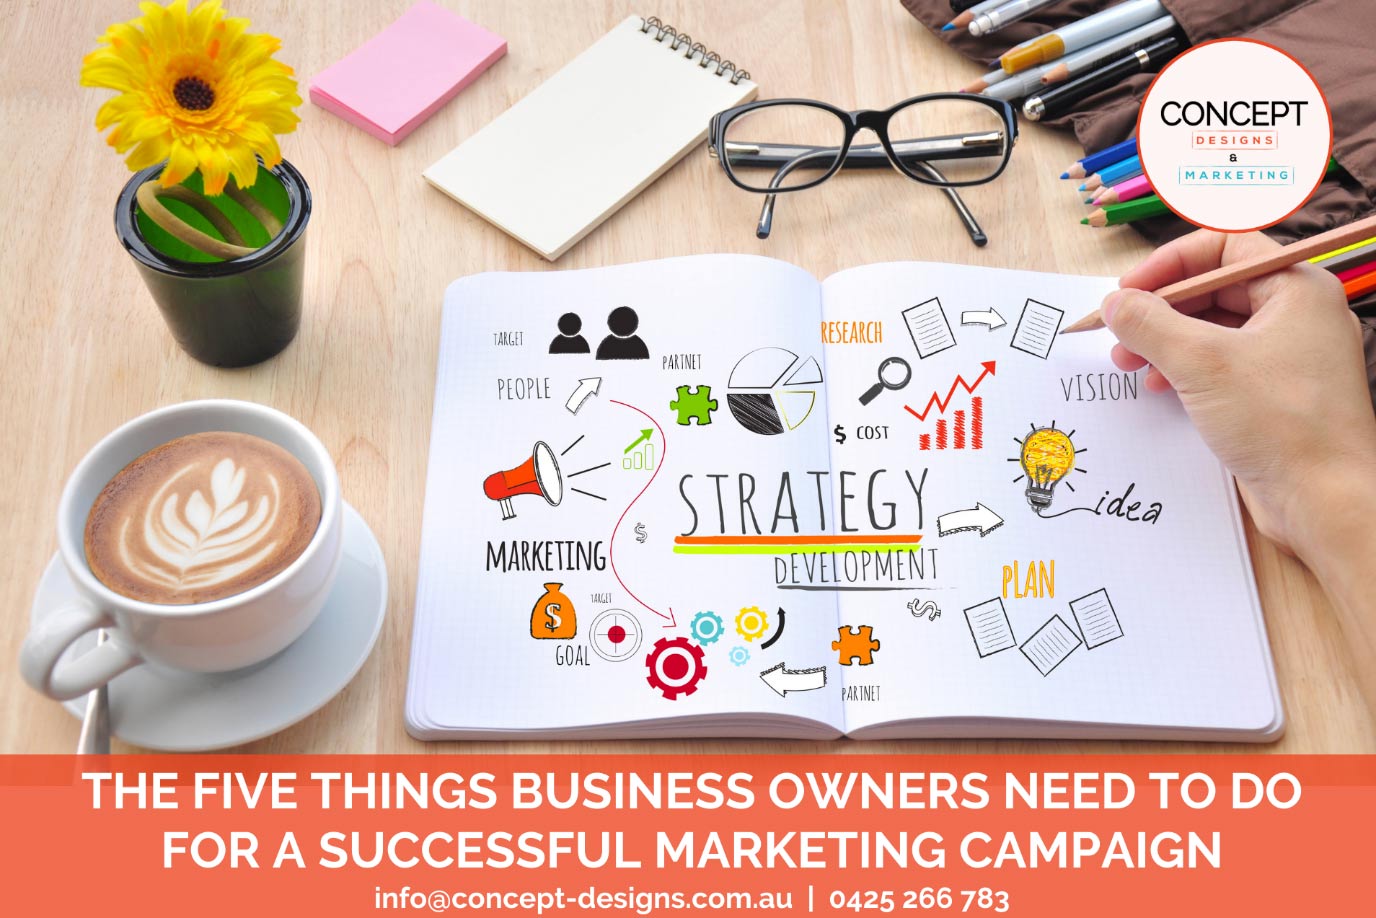 The Five Things Business Owners Need to Do for a Successful Marketing Campaign